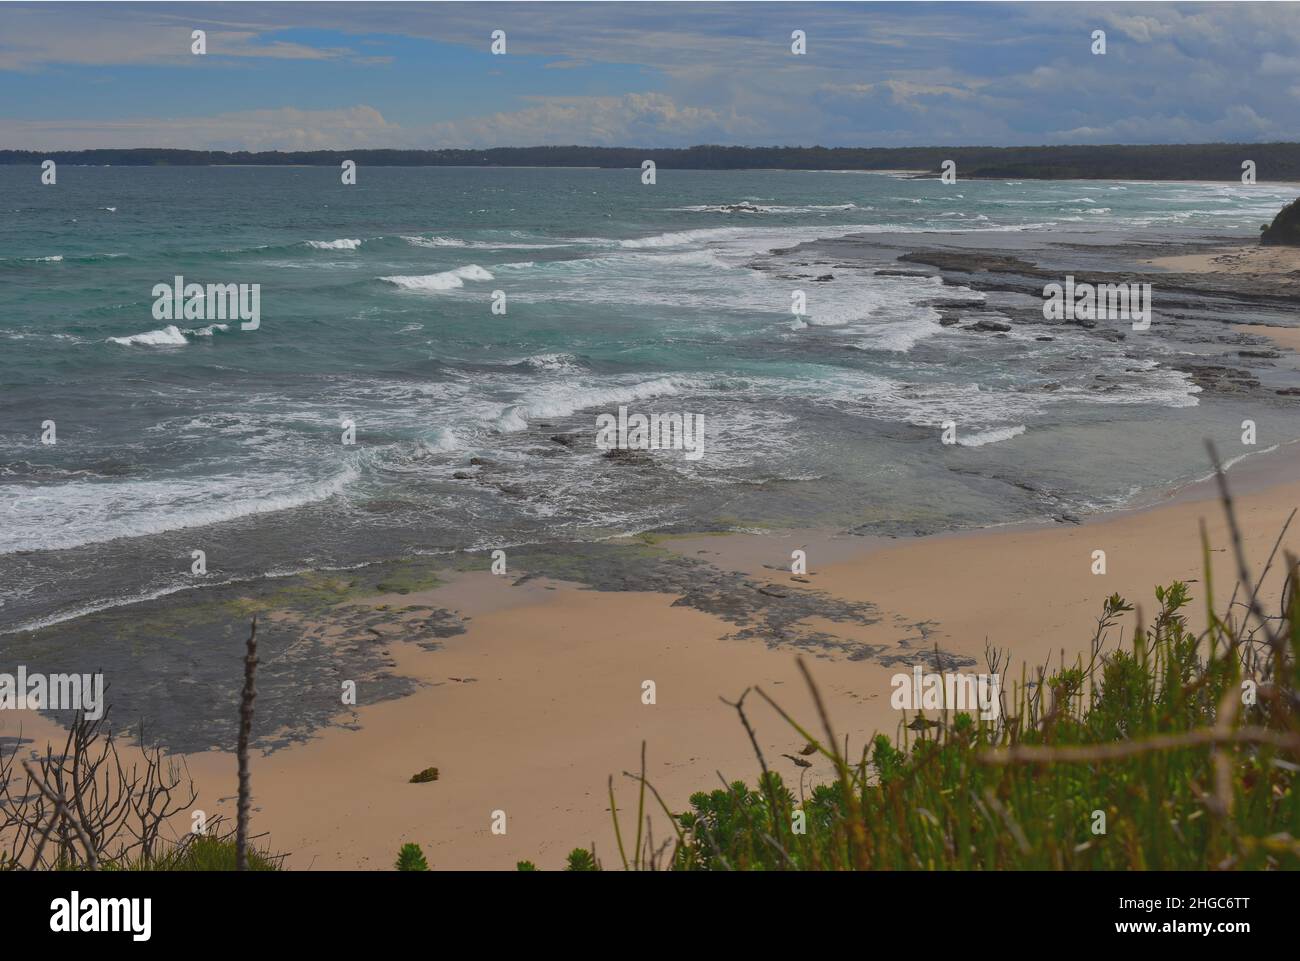 a view of a beach in Jervis Bay, NSW, Australia with surrounding beachfront houses and flora Stock Photo